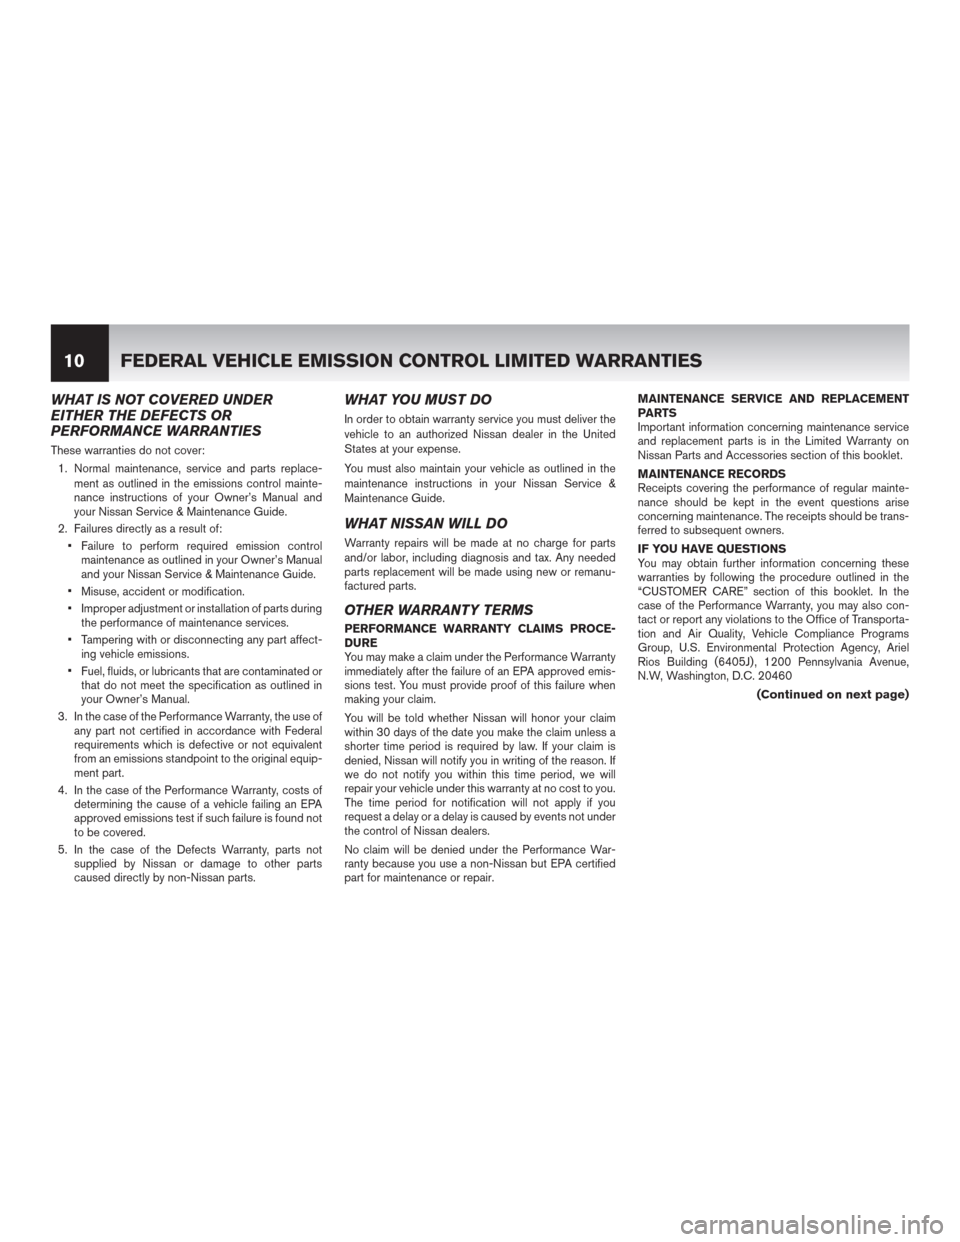 NISSAN TITAN 2015 1.G Warranty Booklet WHAT IS NOT COVERED UNDER
EITHER THE DEFECTS OR
PERFORMANCE WARRANTIES
These warranties do not cover:
1. Normal maintenance, service and parts replace-
ment as outlined in the emissions control mainte